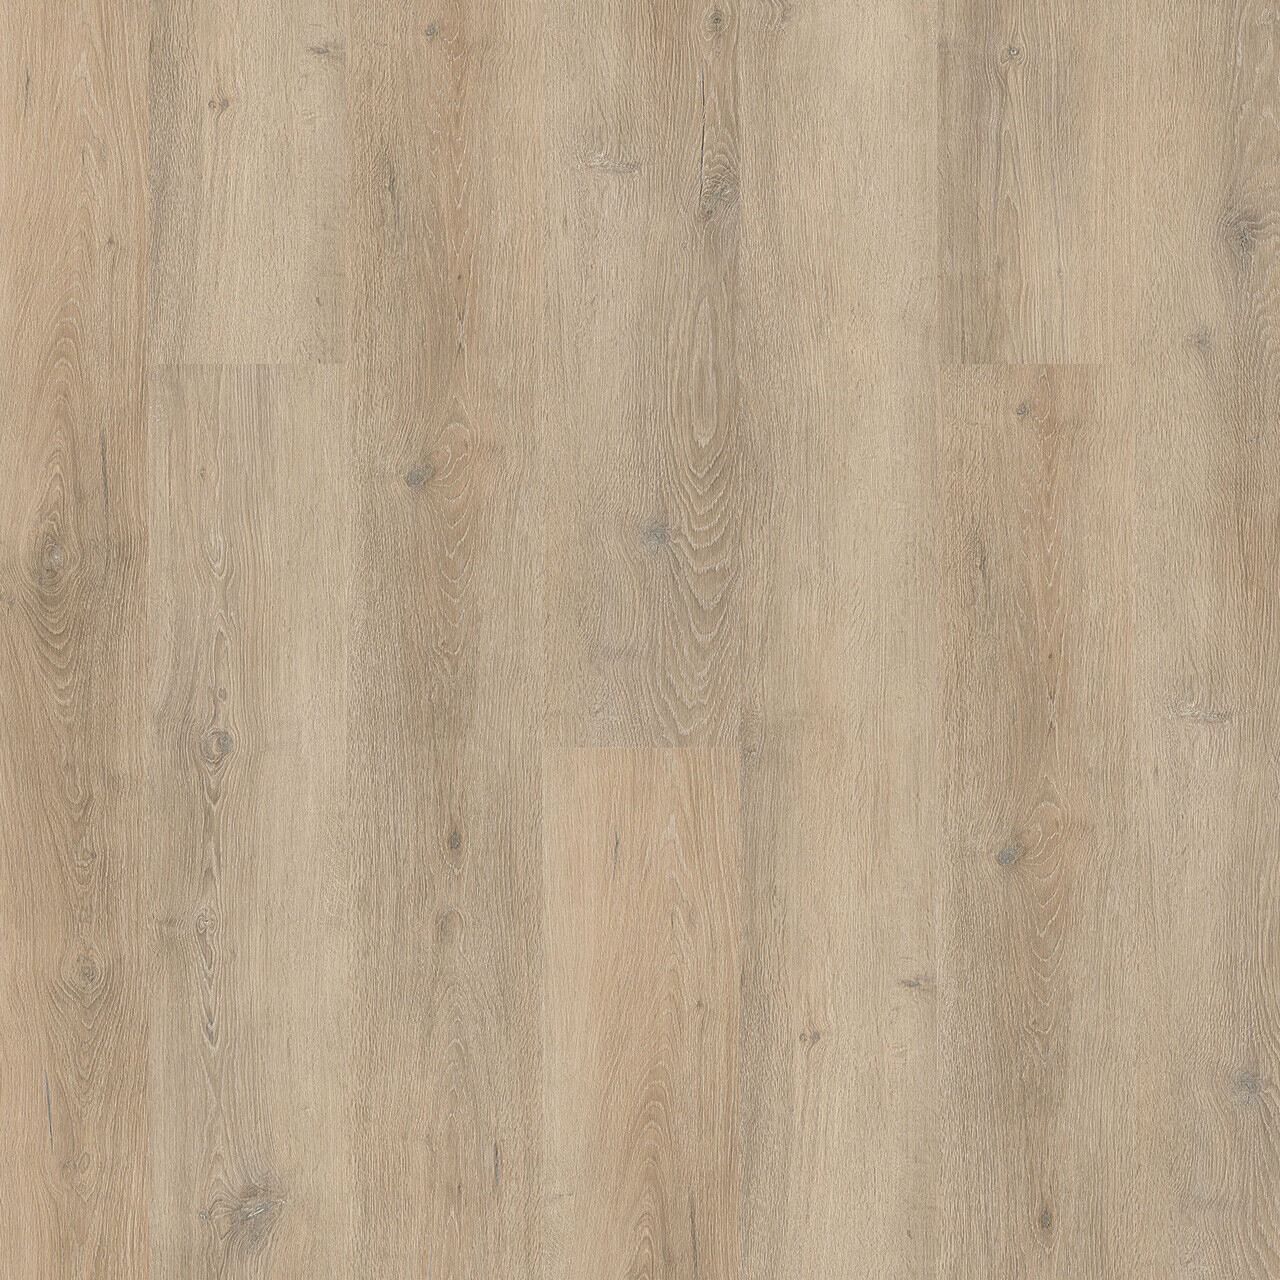 Engineered Floors - Triumph Collection - New Standard Plus - 7 in. x 48 in. - Clearwater